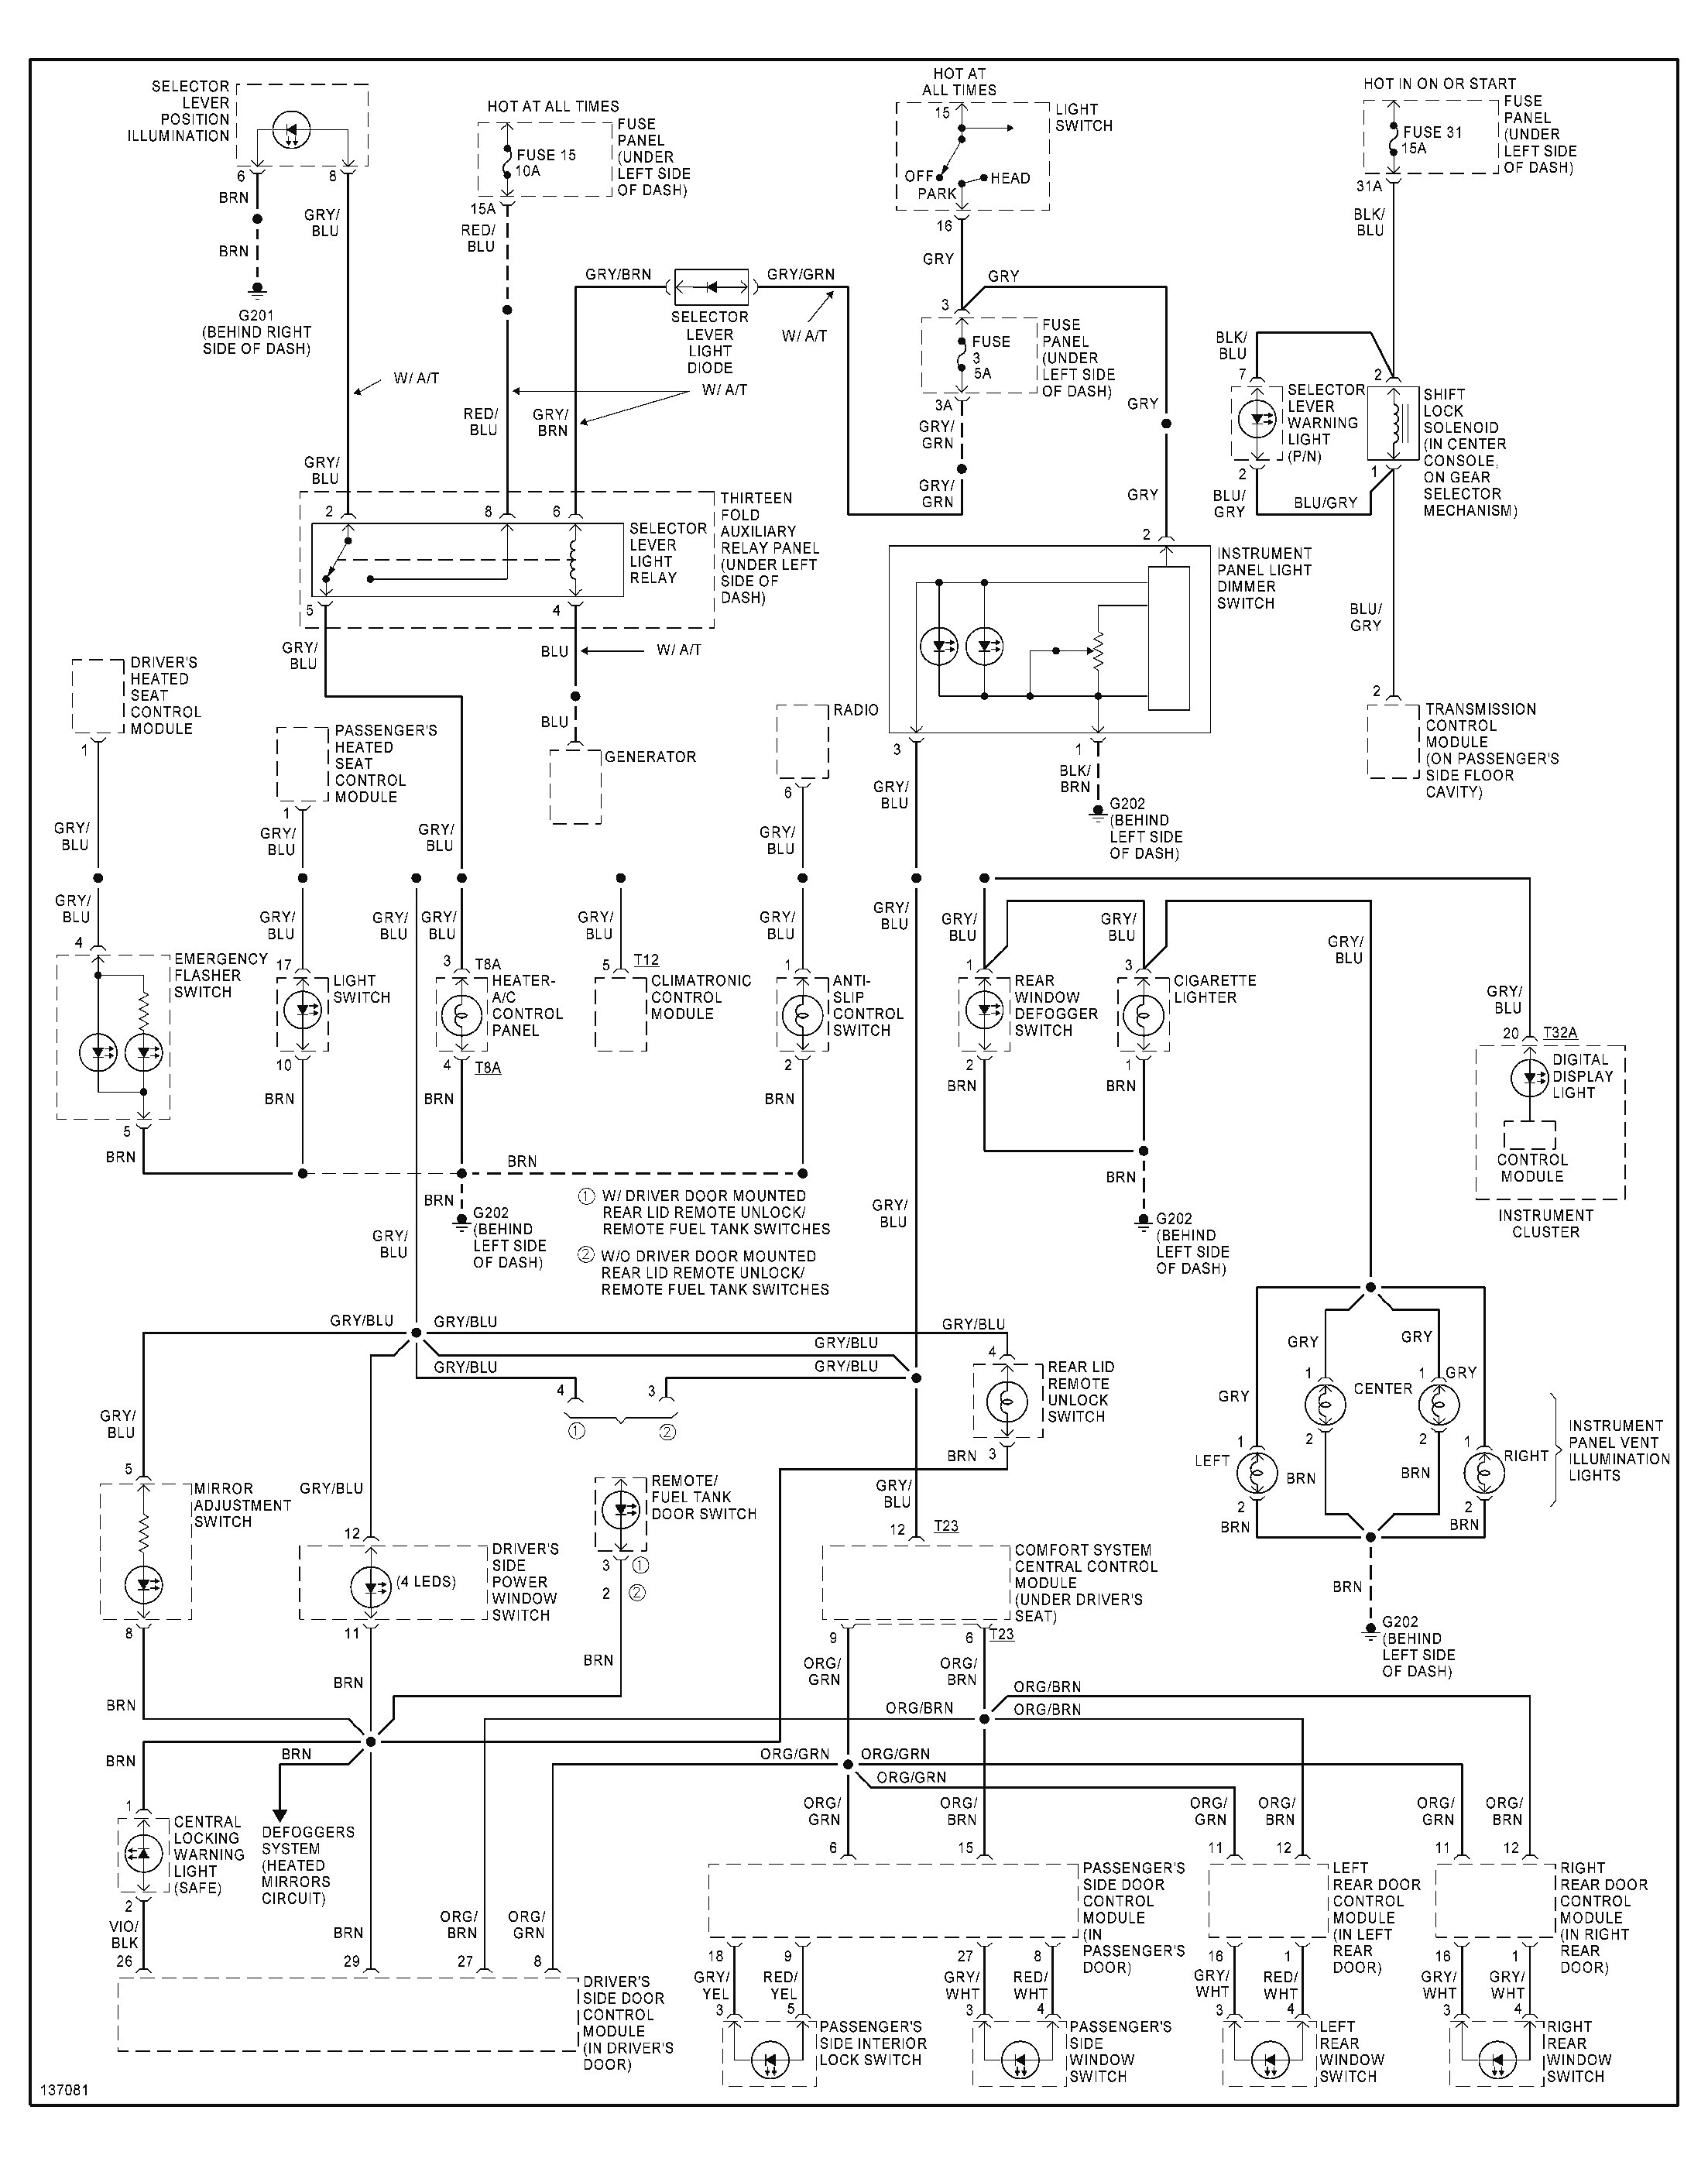 Sony Cdx-Gt565Up Wiring Diagram from mainetreasurechest.com